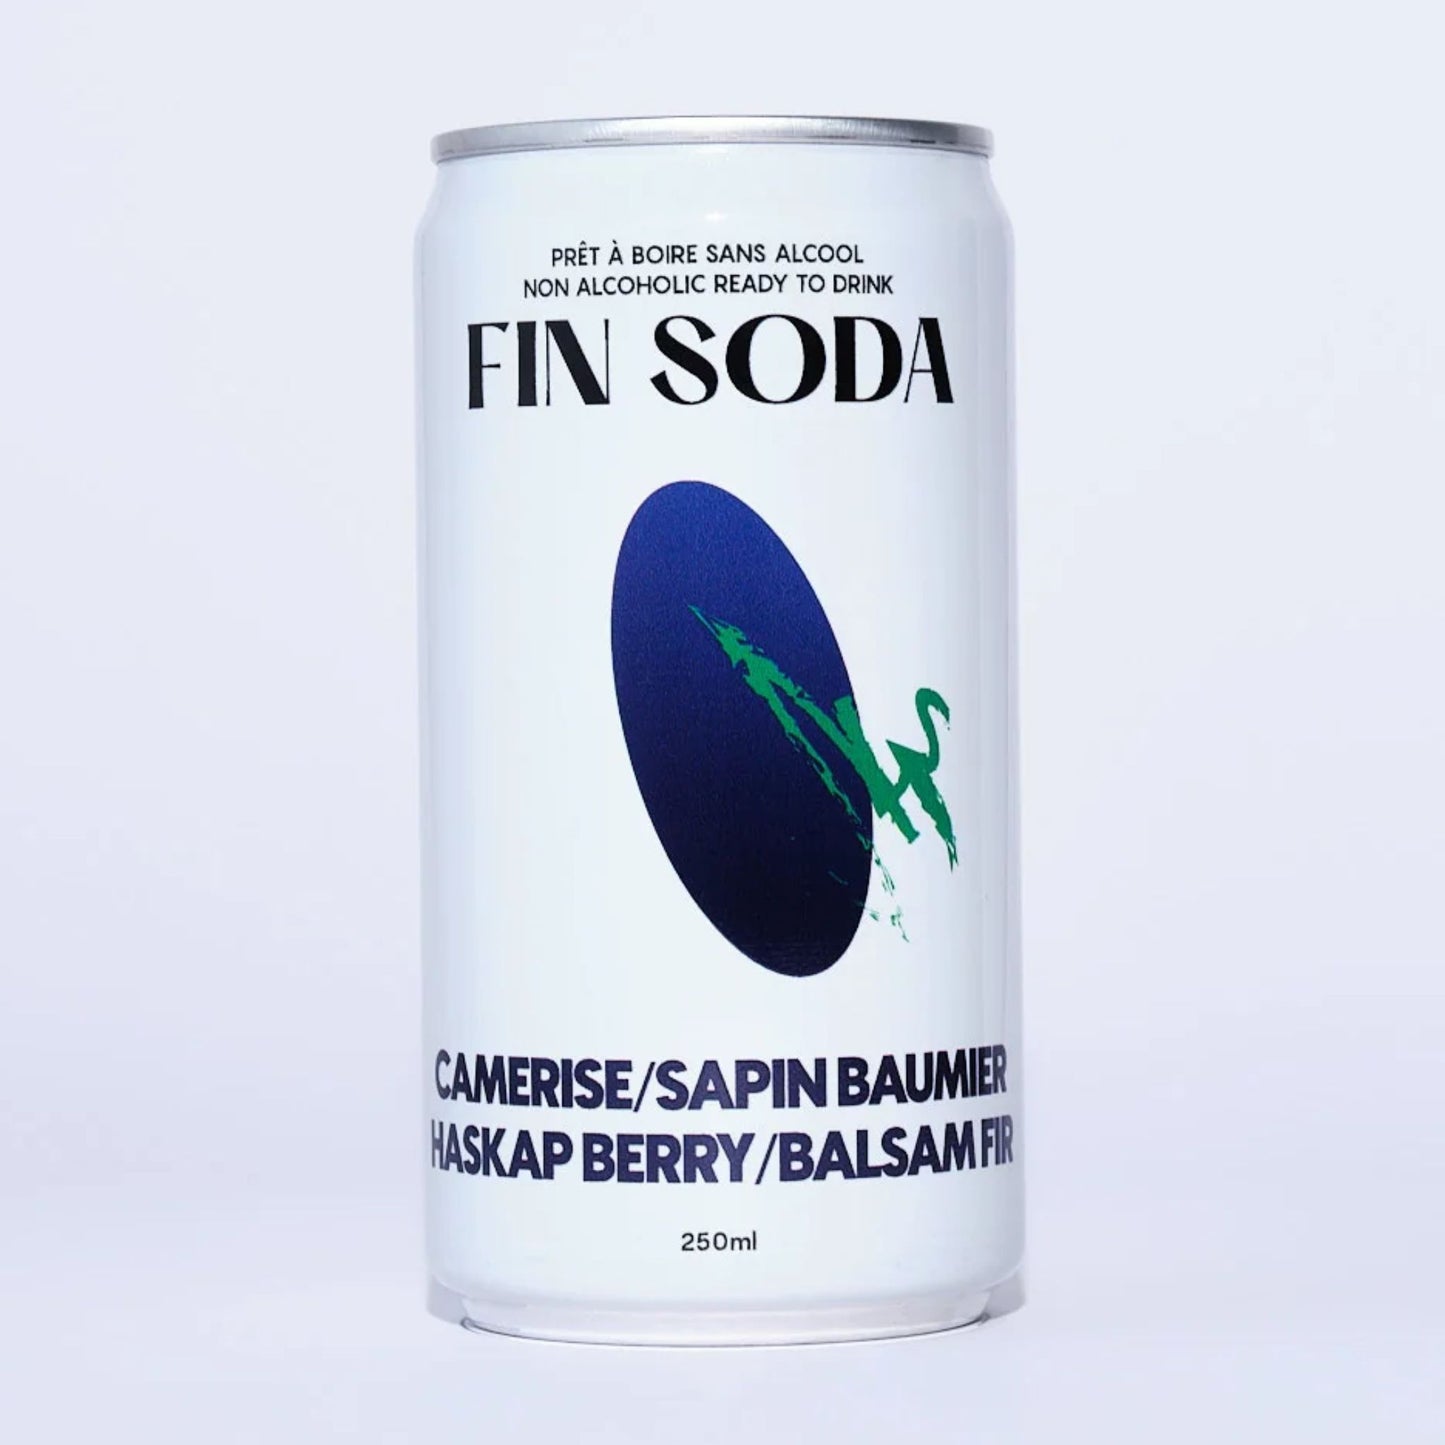 Fin Soda Non-Alcoholic Ready to Drink Haskap Berry and Balsam Fir is available at Knyota Non-Alcoholic Drinks.